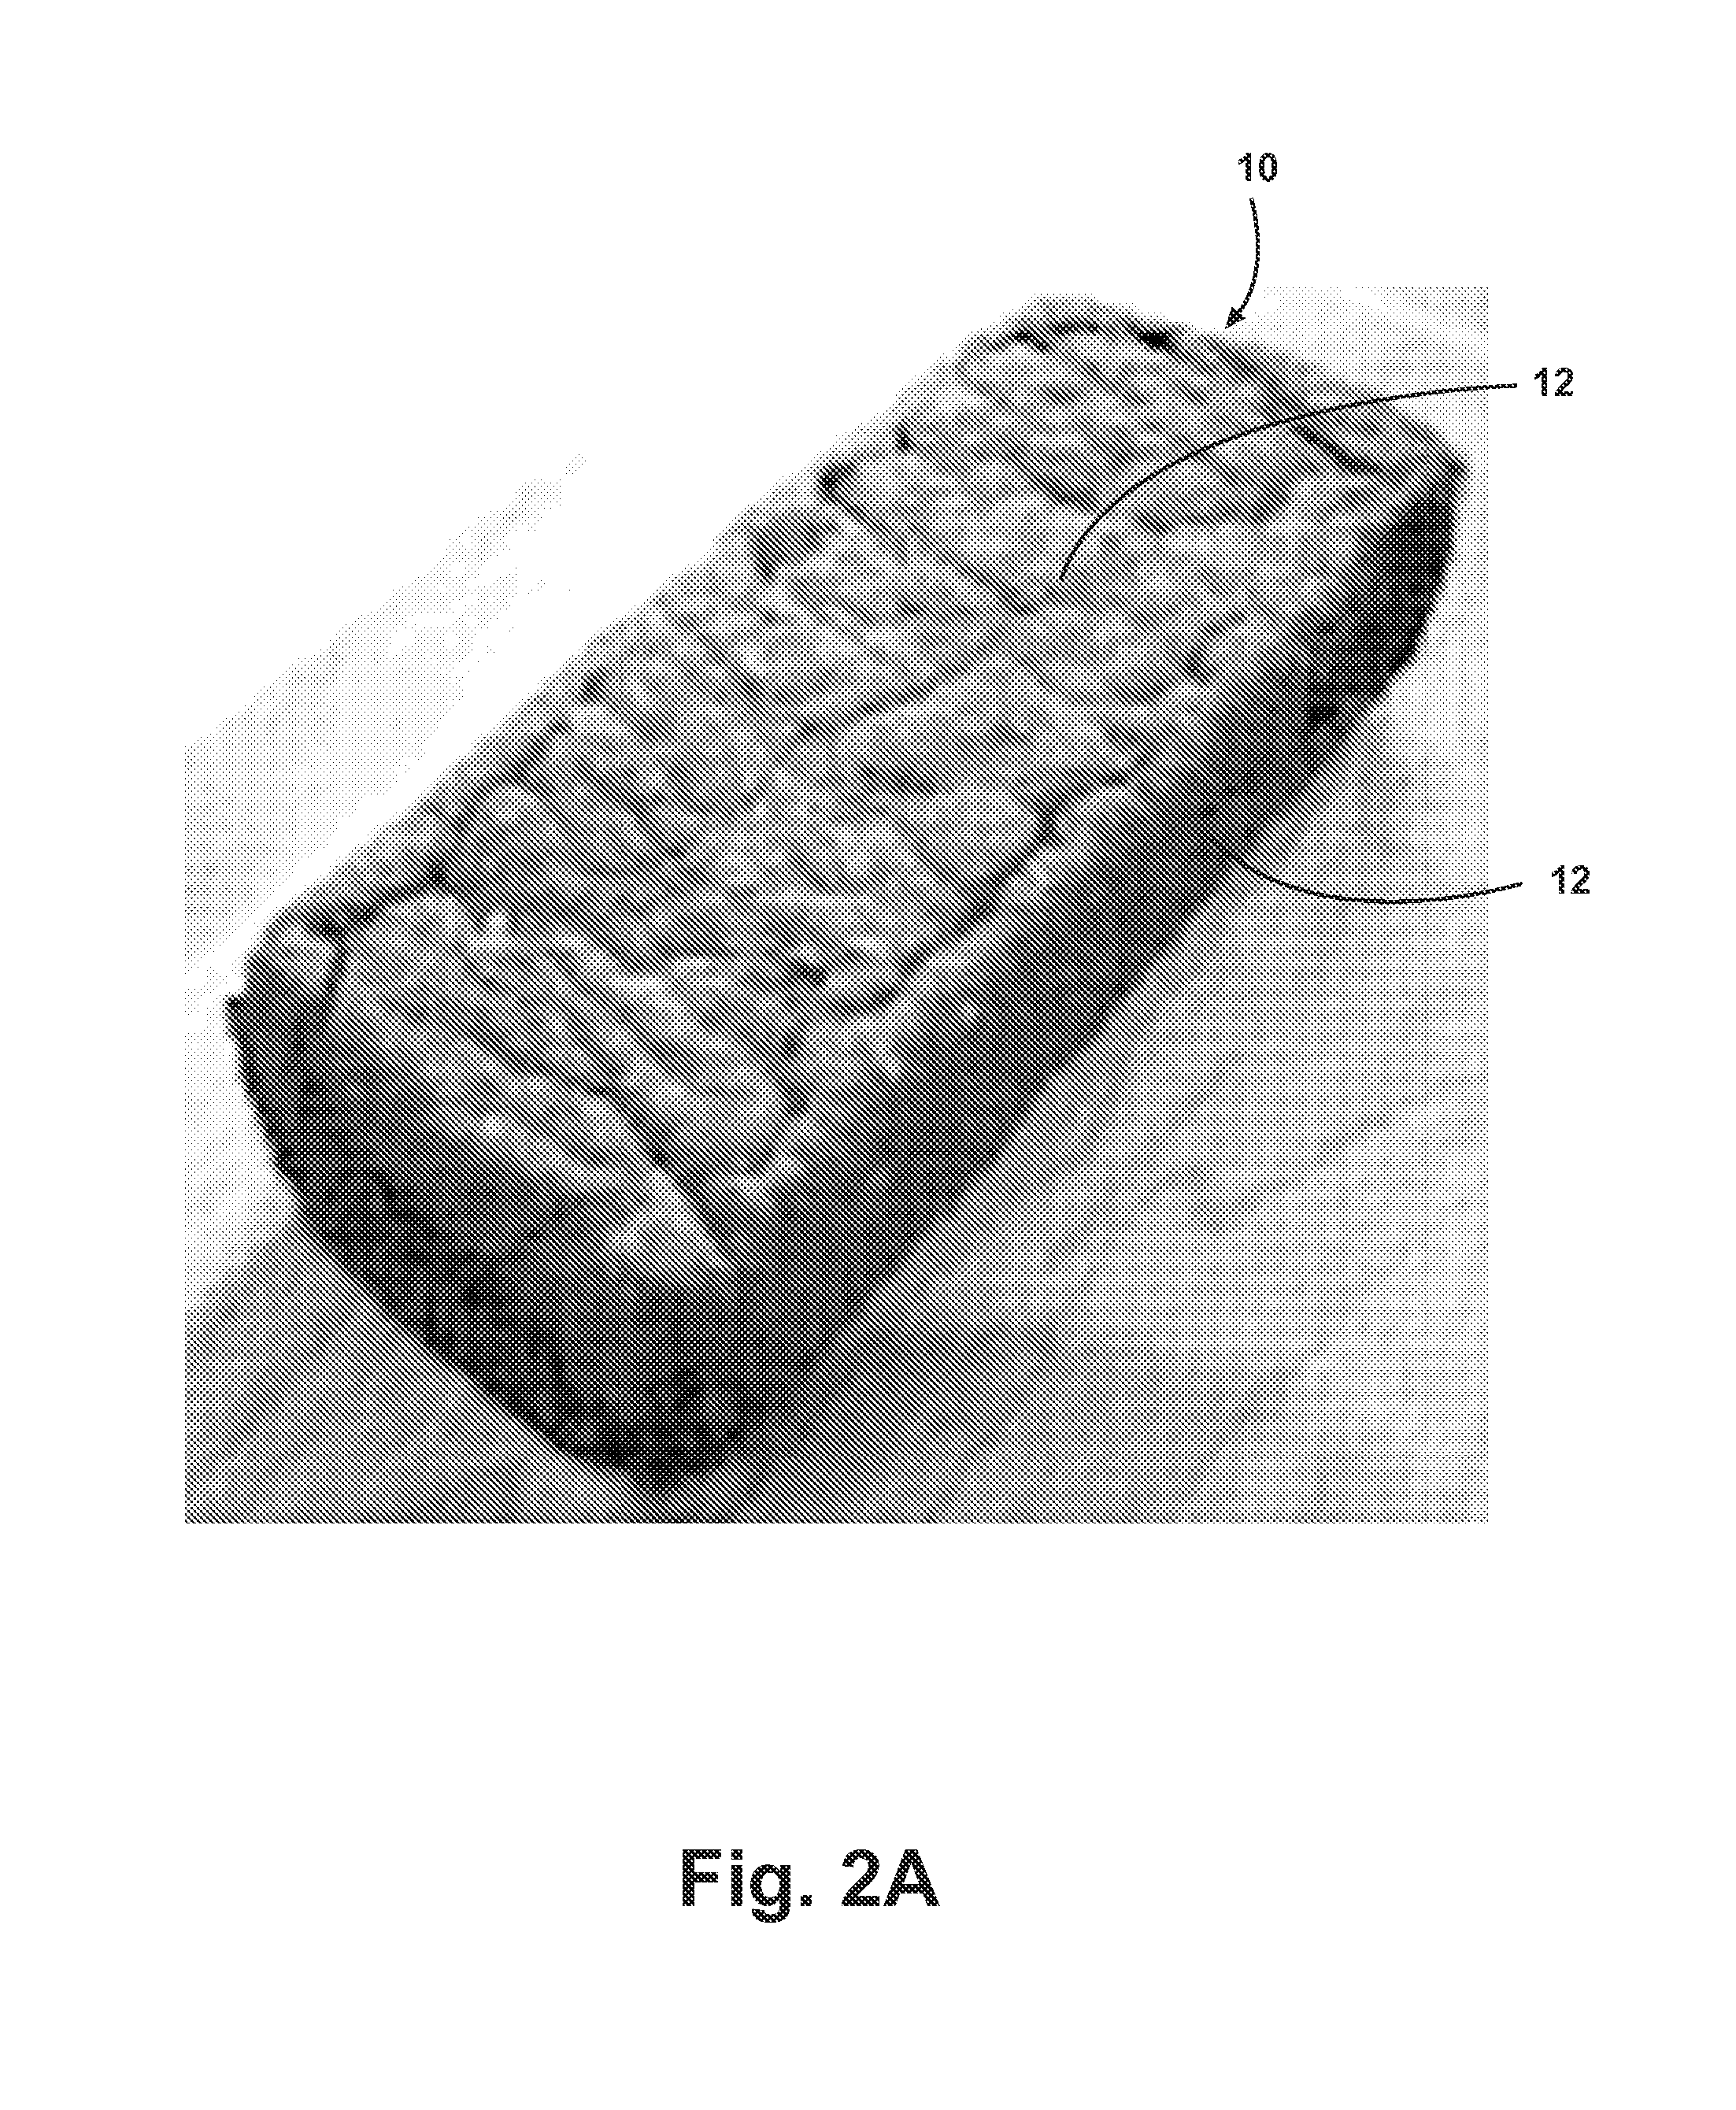 Device and Process for Processing Organic Waste